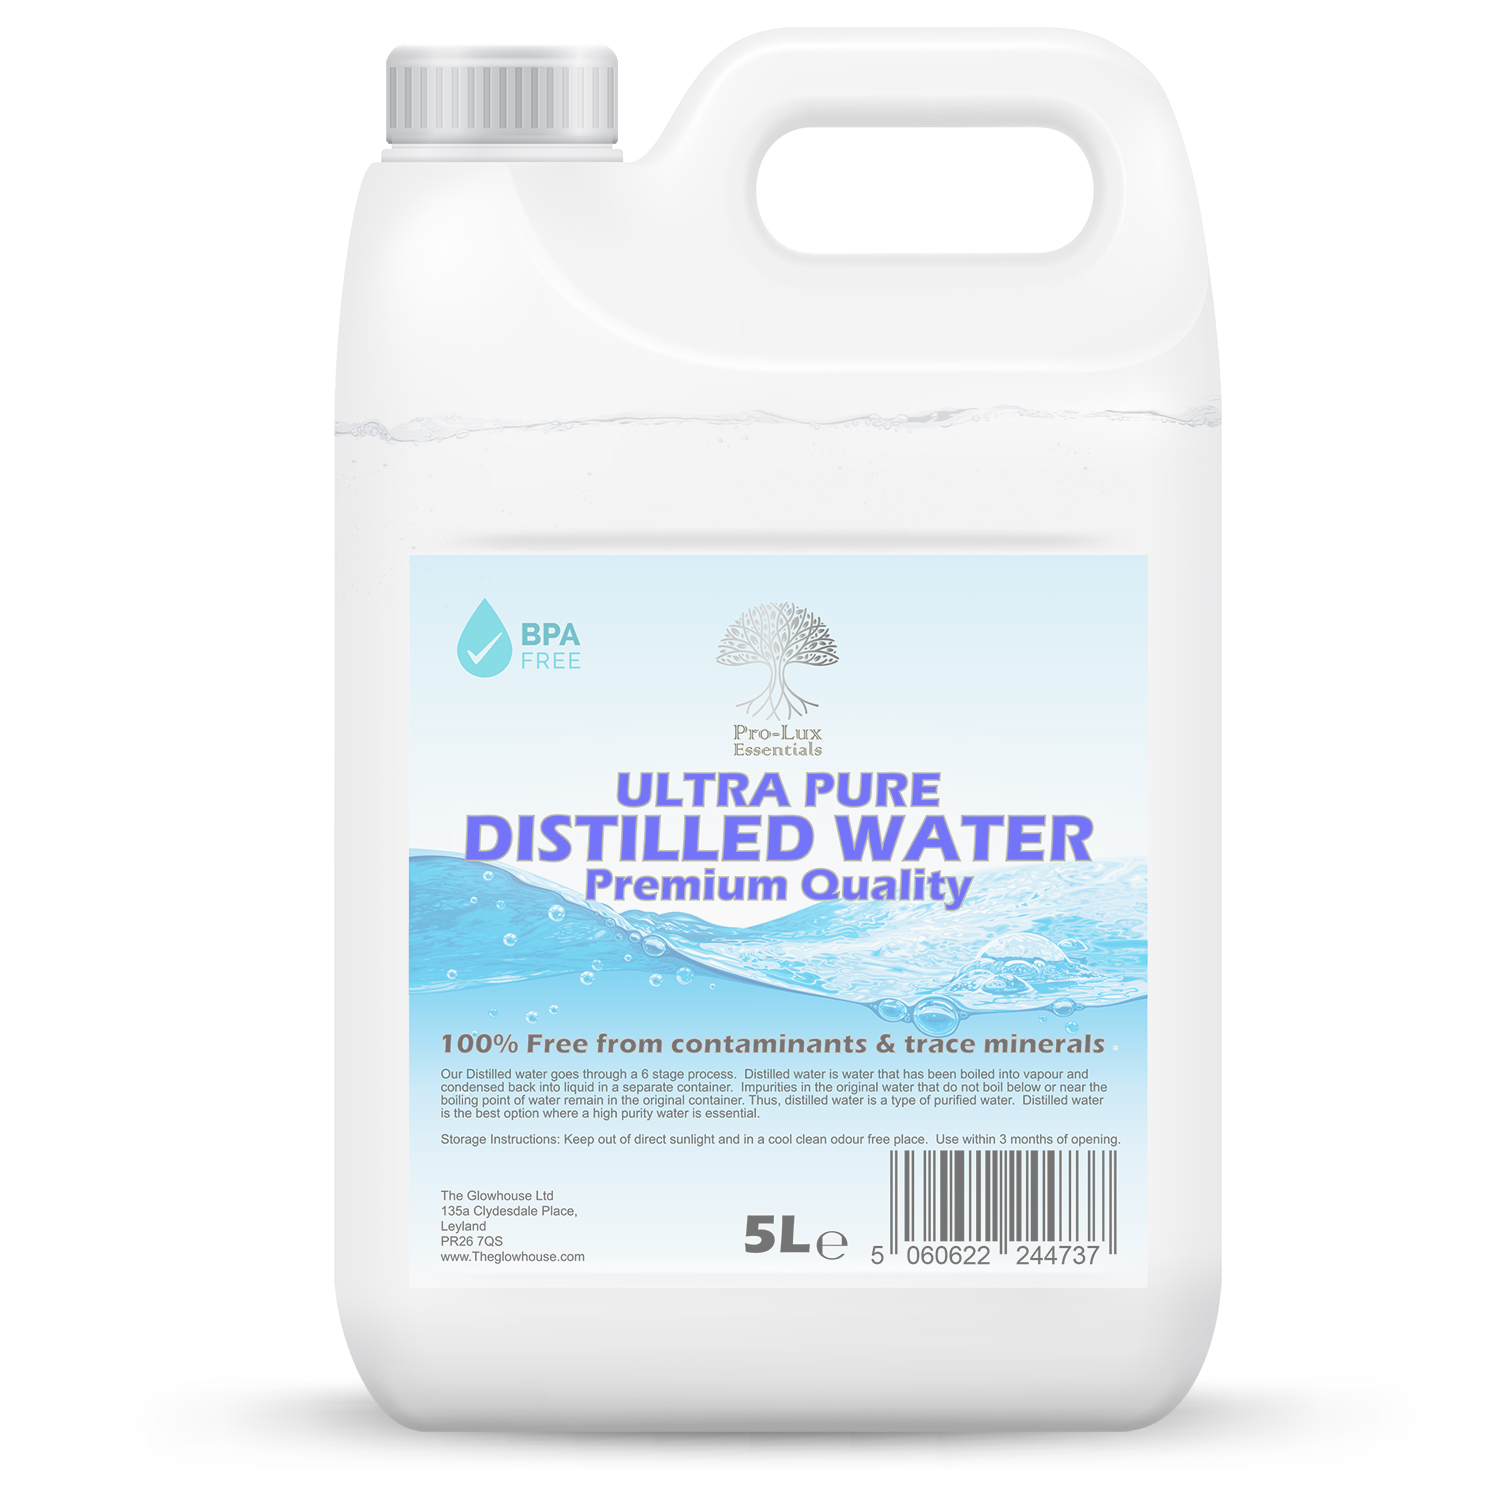 5L Distilled Water, For Hospital Use at best price in Sriperumbudur